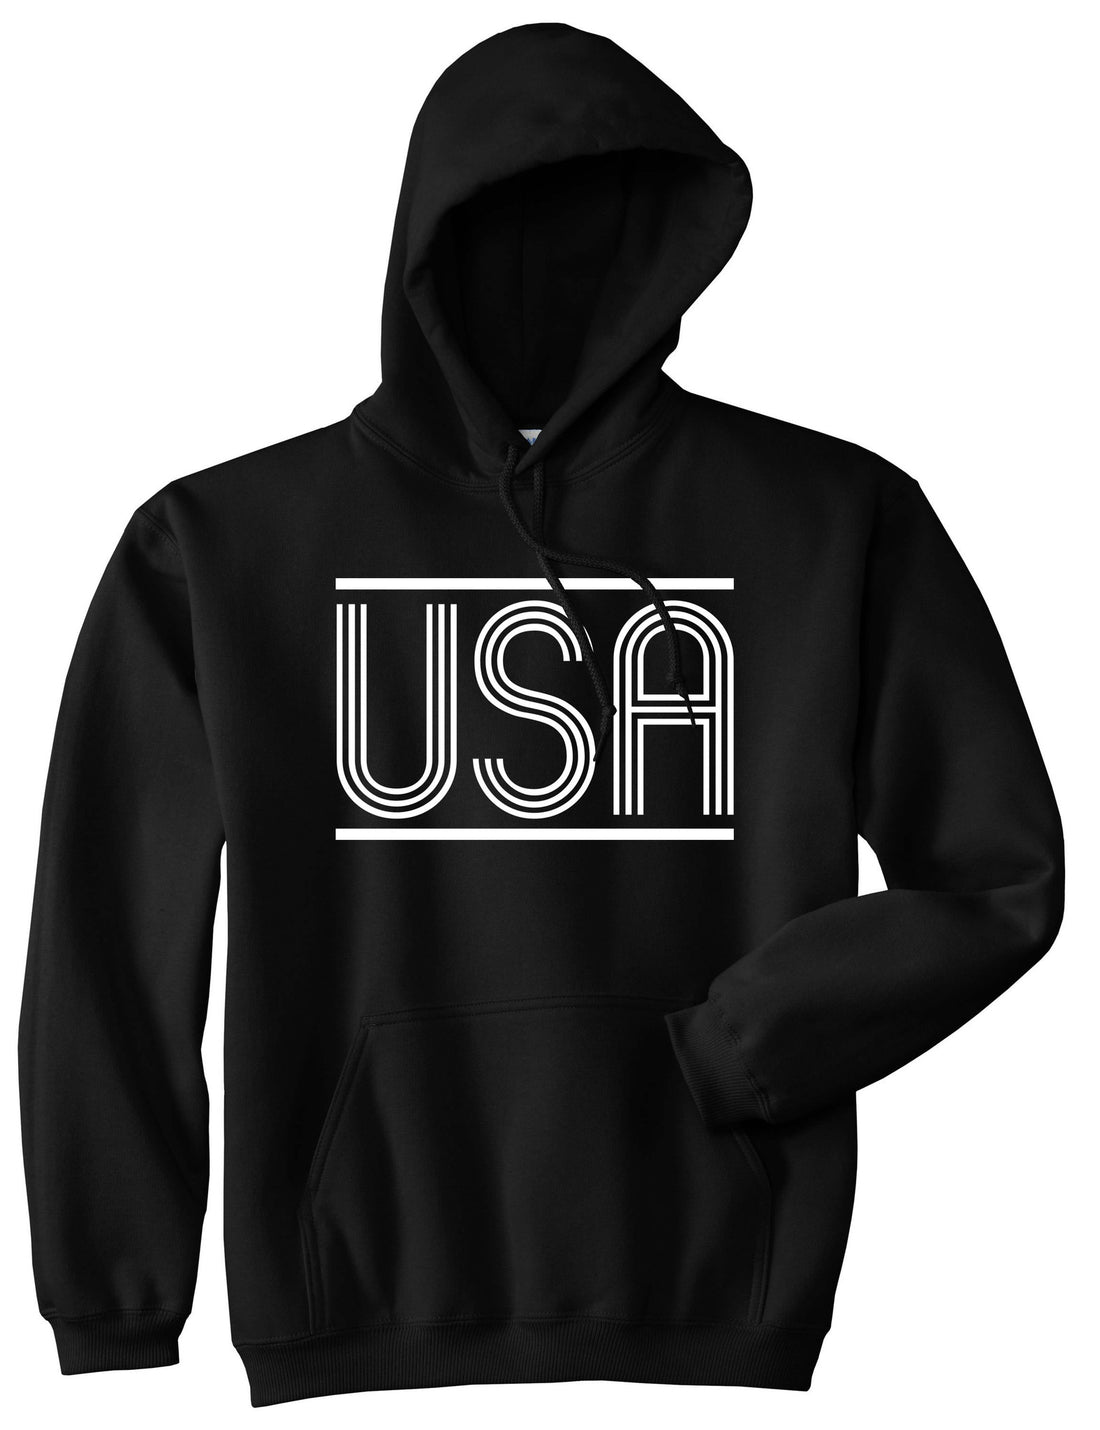 USA America Fall15 Pullover Hoodie Hoody in Black by Kings Of NY